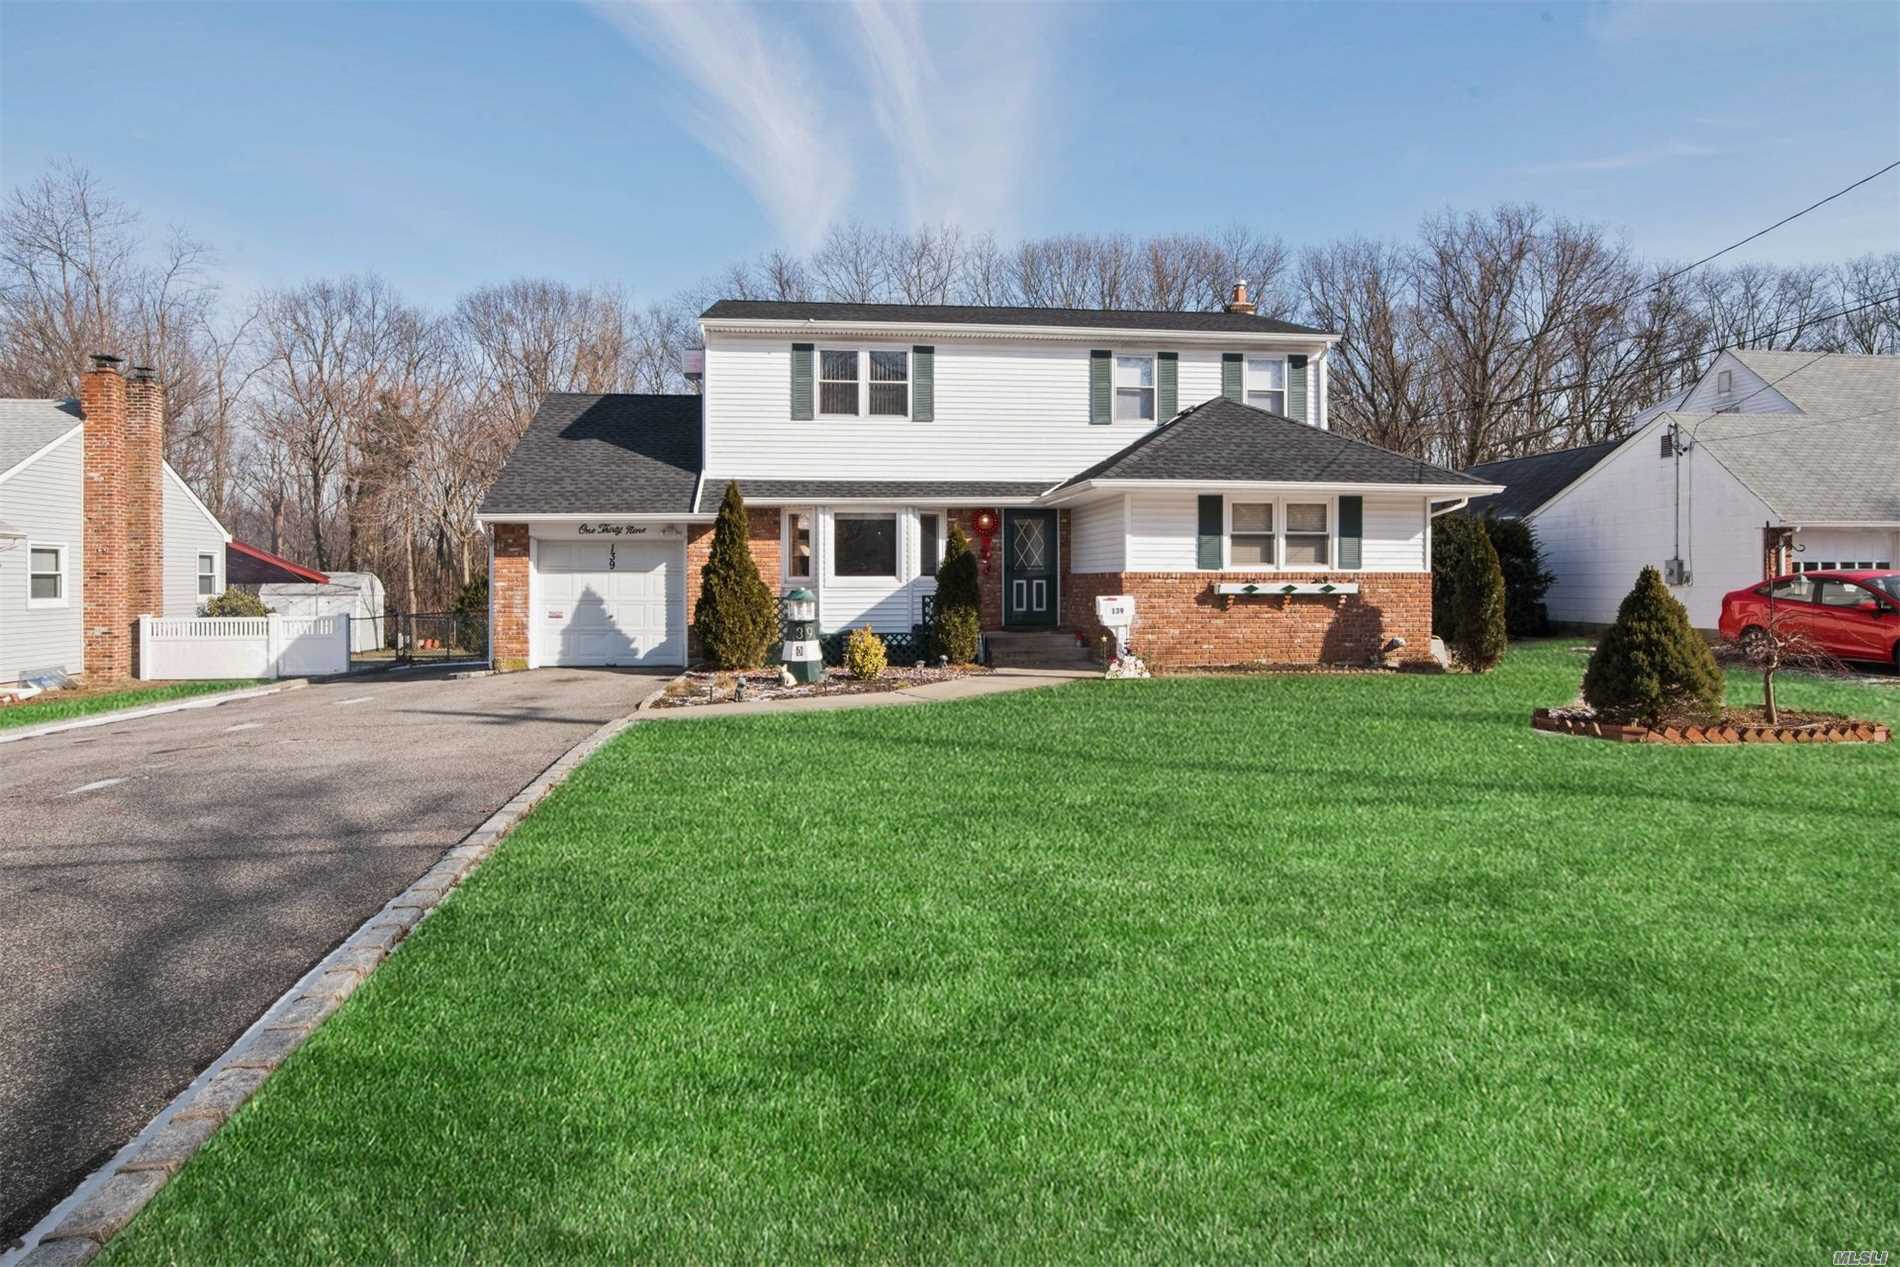 Gorgeous 5 Bedroom, 2 Bathroom, Expanded Cape. New Roof, New Bathroom, Quiet Street. Over .25 Acre Lot, Above Ground Pool. 1 Car Garage. Full Finished Basement With Separate Outside Entrance. Open Concept Kitchen And Living Room. Completely Renovated 2nd Floor. 220 Amp Service. This Is A Must See!!